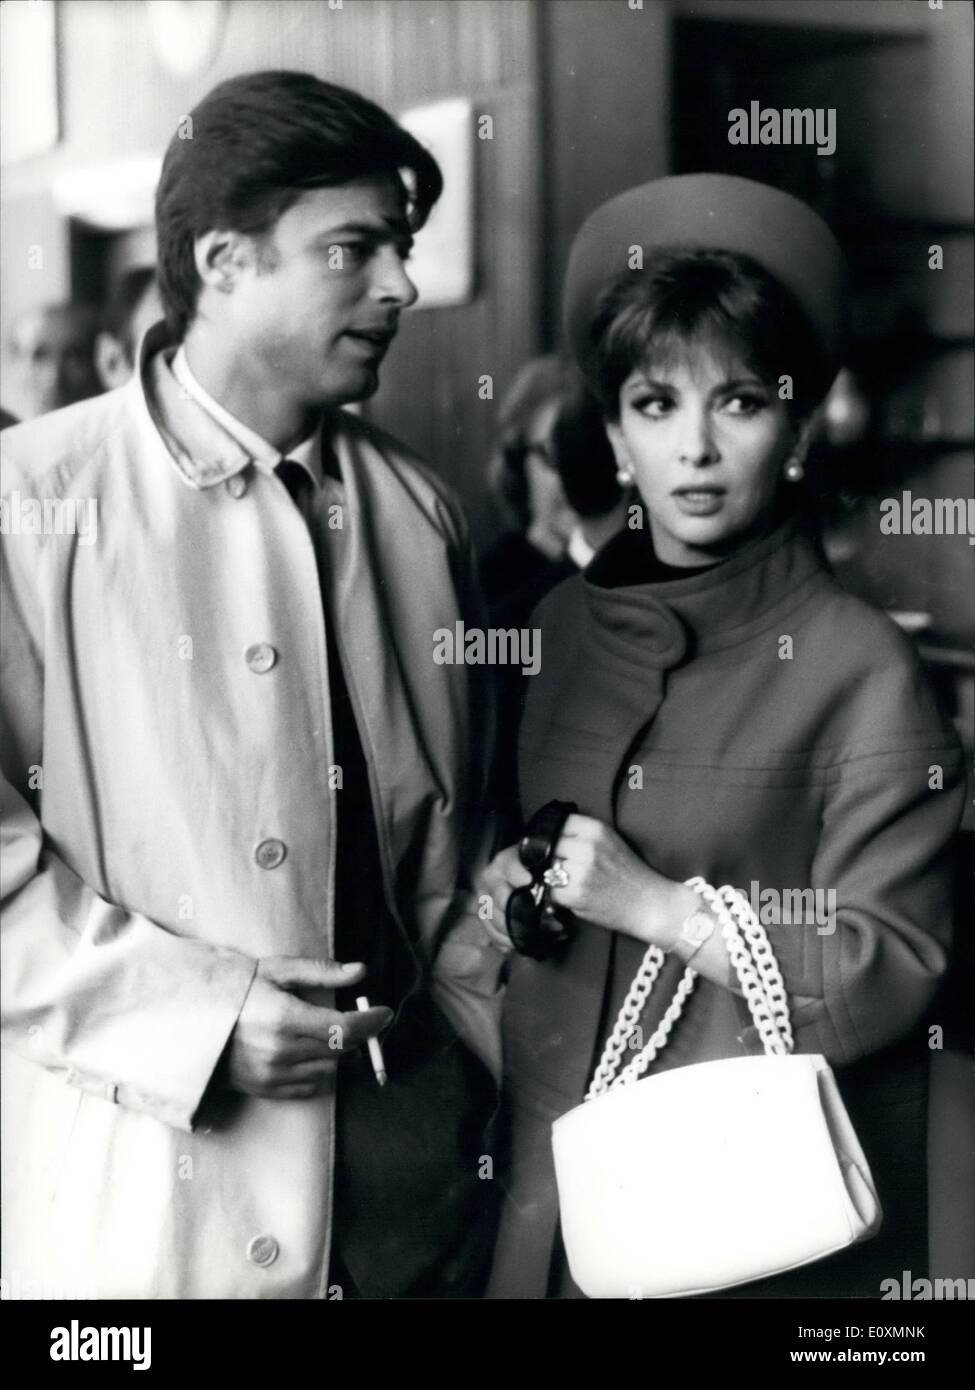 Apr. 04, 1967 - Italian actress Gina Lollobrigida and French actor Jean Sorel went to the Court for the trial of appeal. They are accused to work in the film ''Le Bam bole'' (the dolls), in a scene considered immoral by the Court. The first court condamned them to two months of reclusion. Photo shows Gina Lollbrigida and Jean Sorel outside the Court. Stock Photo